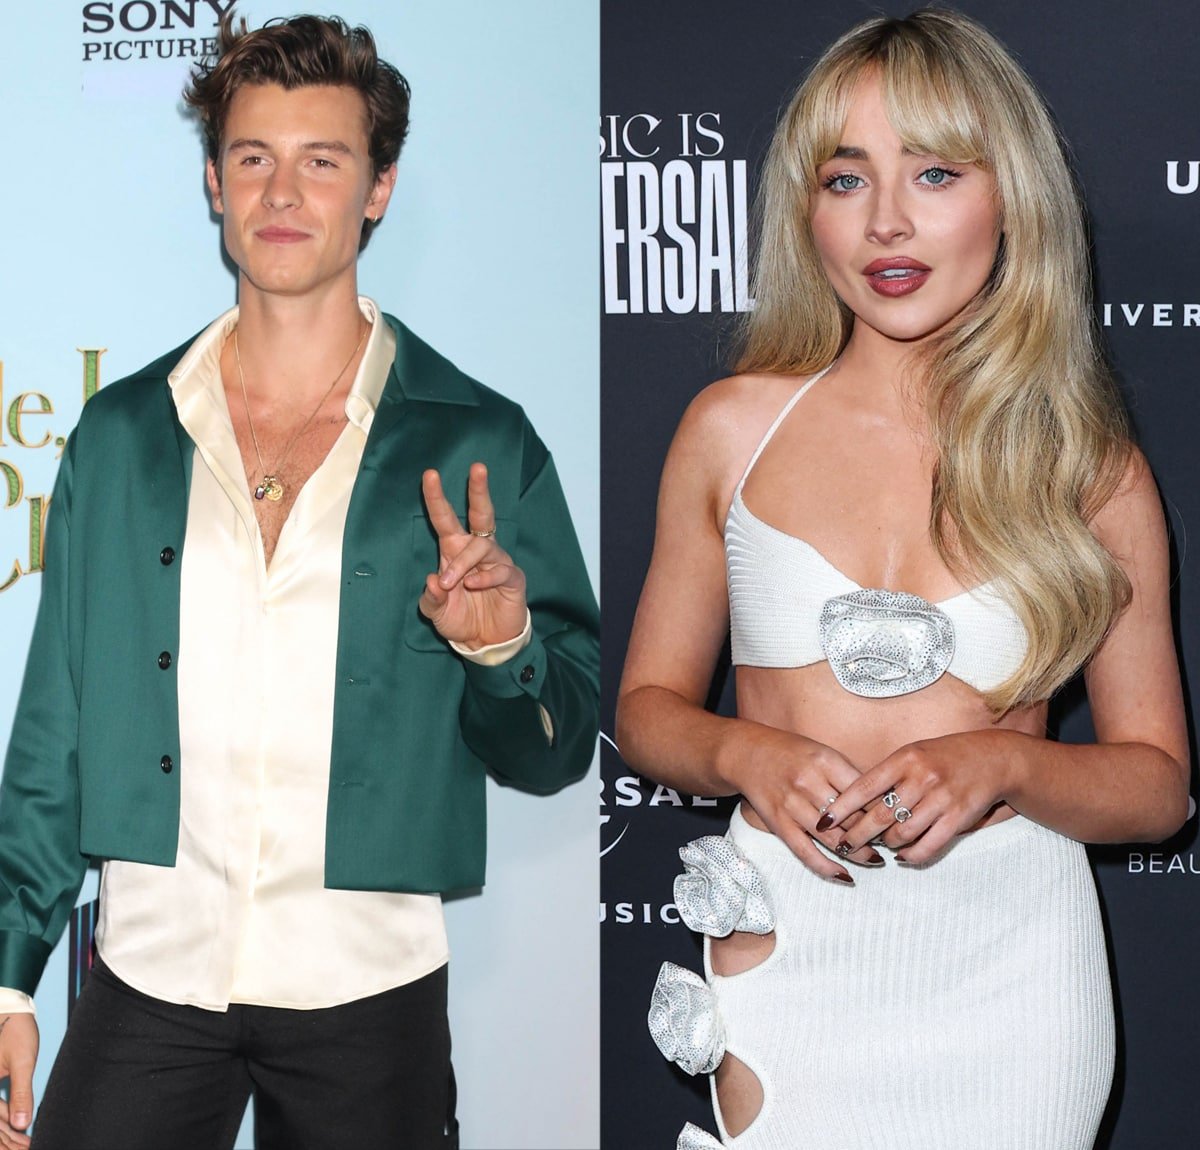 Shawn Mendes and Sabrina Carpenter spark dating rumors after they were seen hanging out together around Los Angeles on several occasions